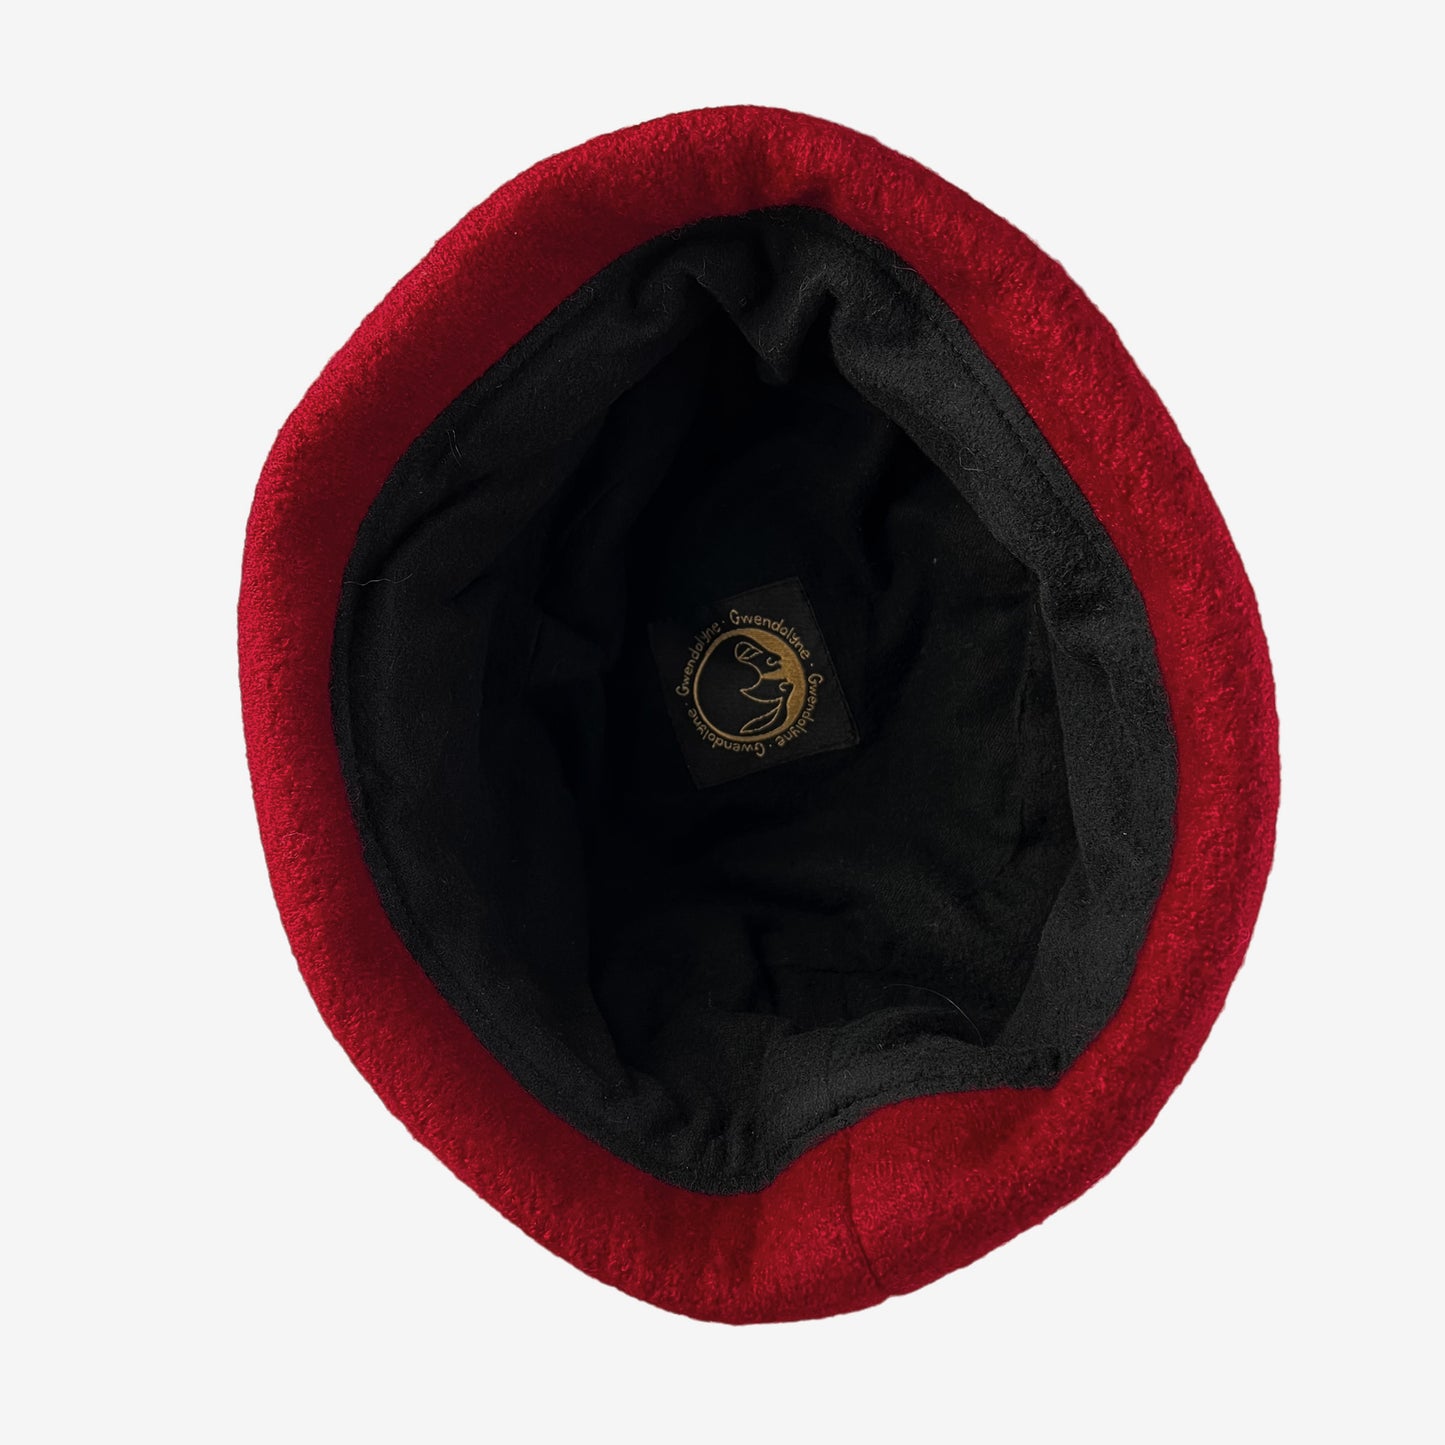 Hedy Wool Pillbox Hat Large Red